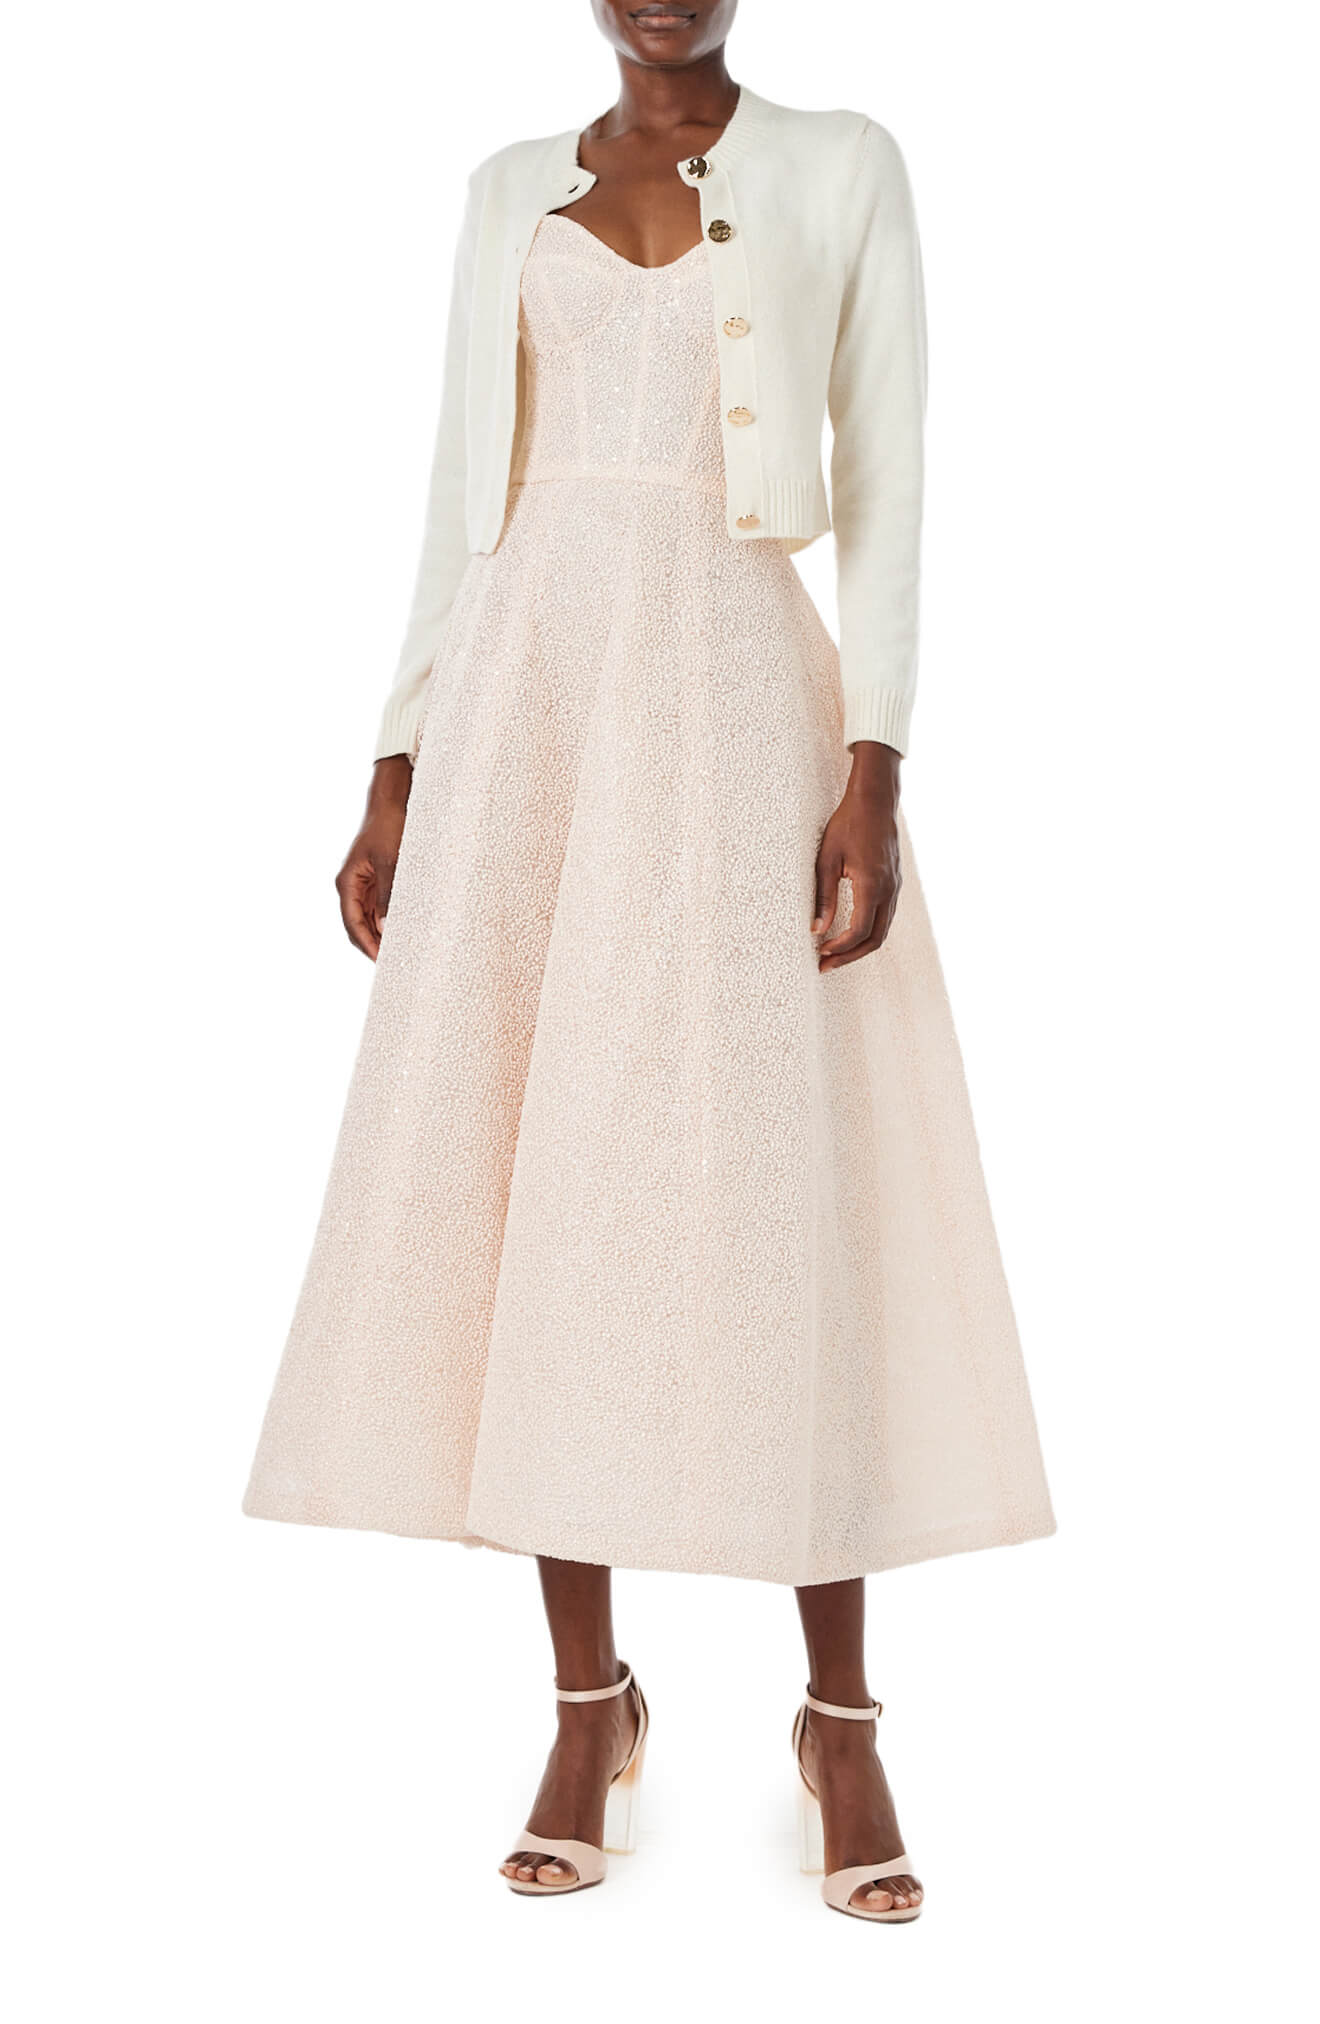 Monique Lhuillier Spring 2024 white knit cropped cardigan over blush embroidered dress.